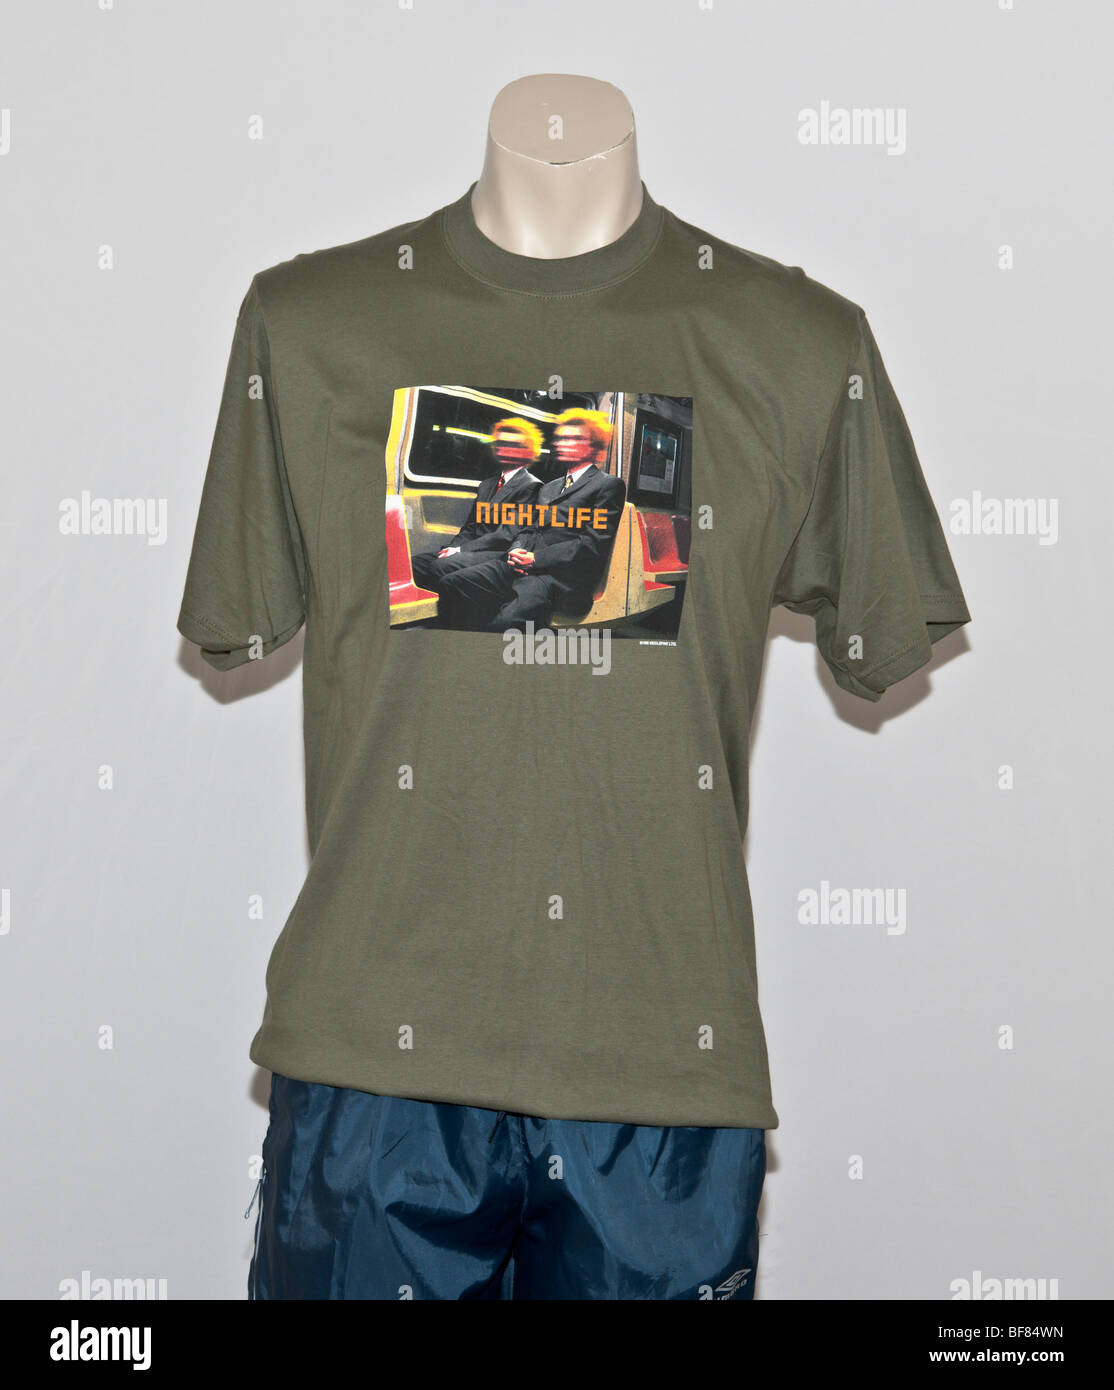 T-shirt featuring screen printed artwork of Pet Shop Boys album Nightlife dating from 1999 - 2000. Stock Photo